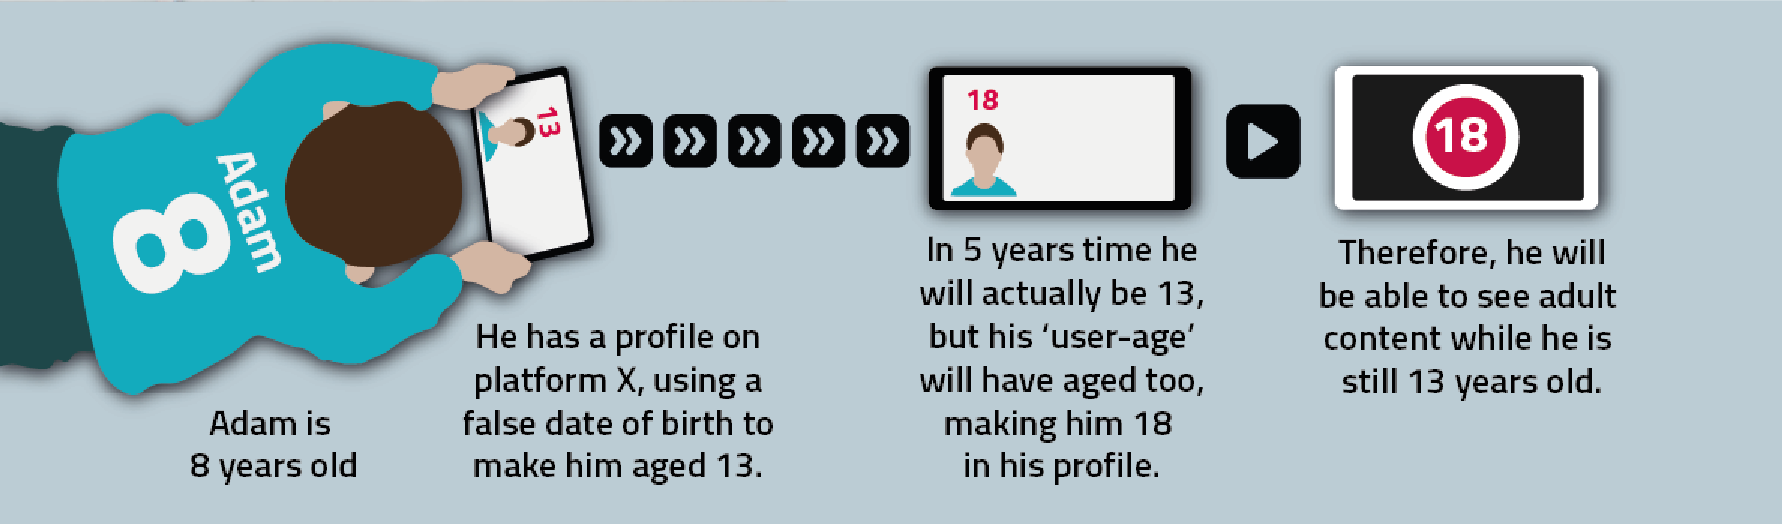 Adam is 8 years old. He has a profile on platform X, using a false date of birth to make him aged 13. In 5 years time he will actually be 13, but his 'user-age' will have aged too, making im 18 in his profile. Therefore, he will be able to see adult content while he is still 13 years old.